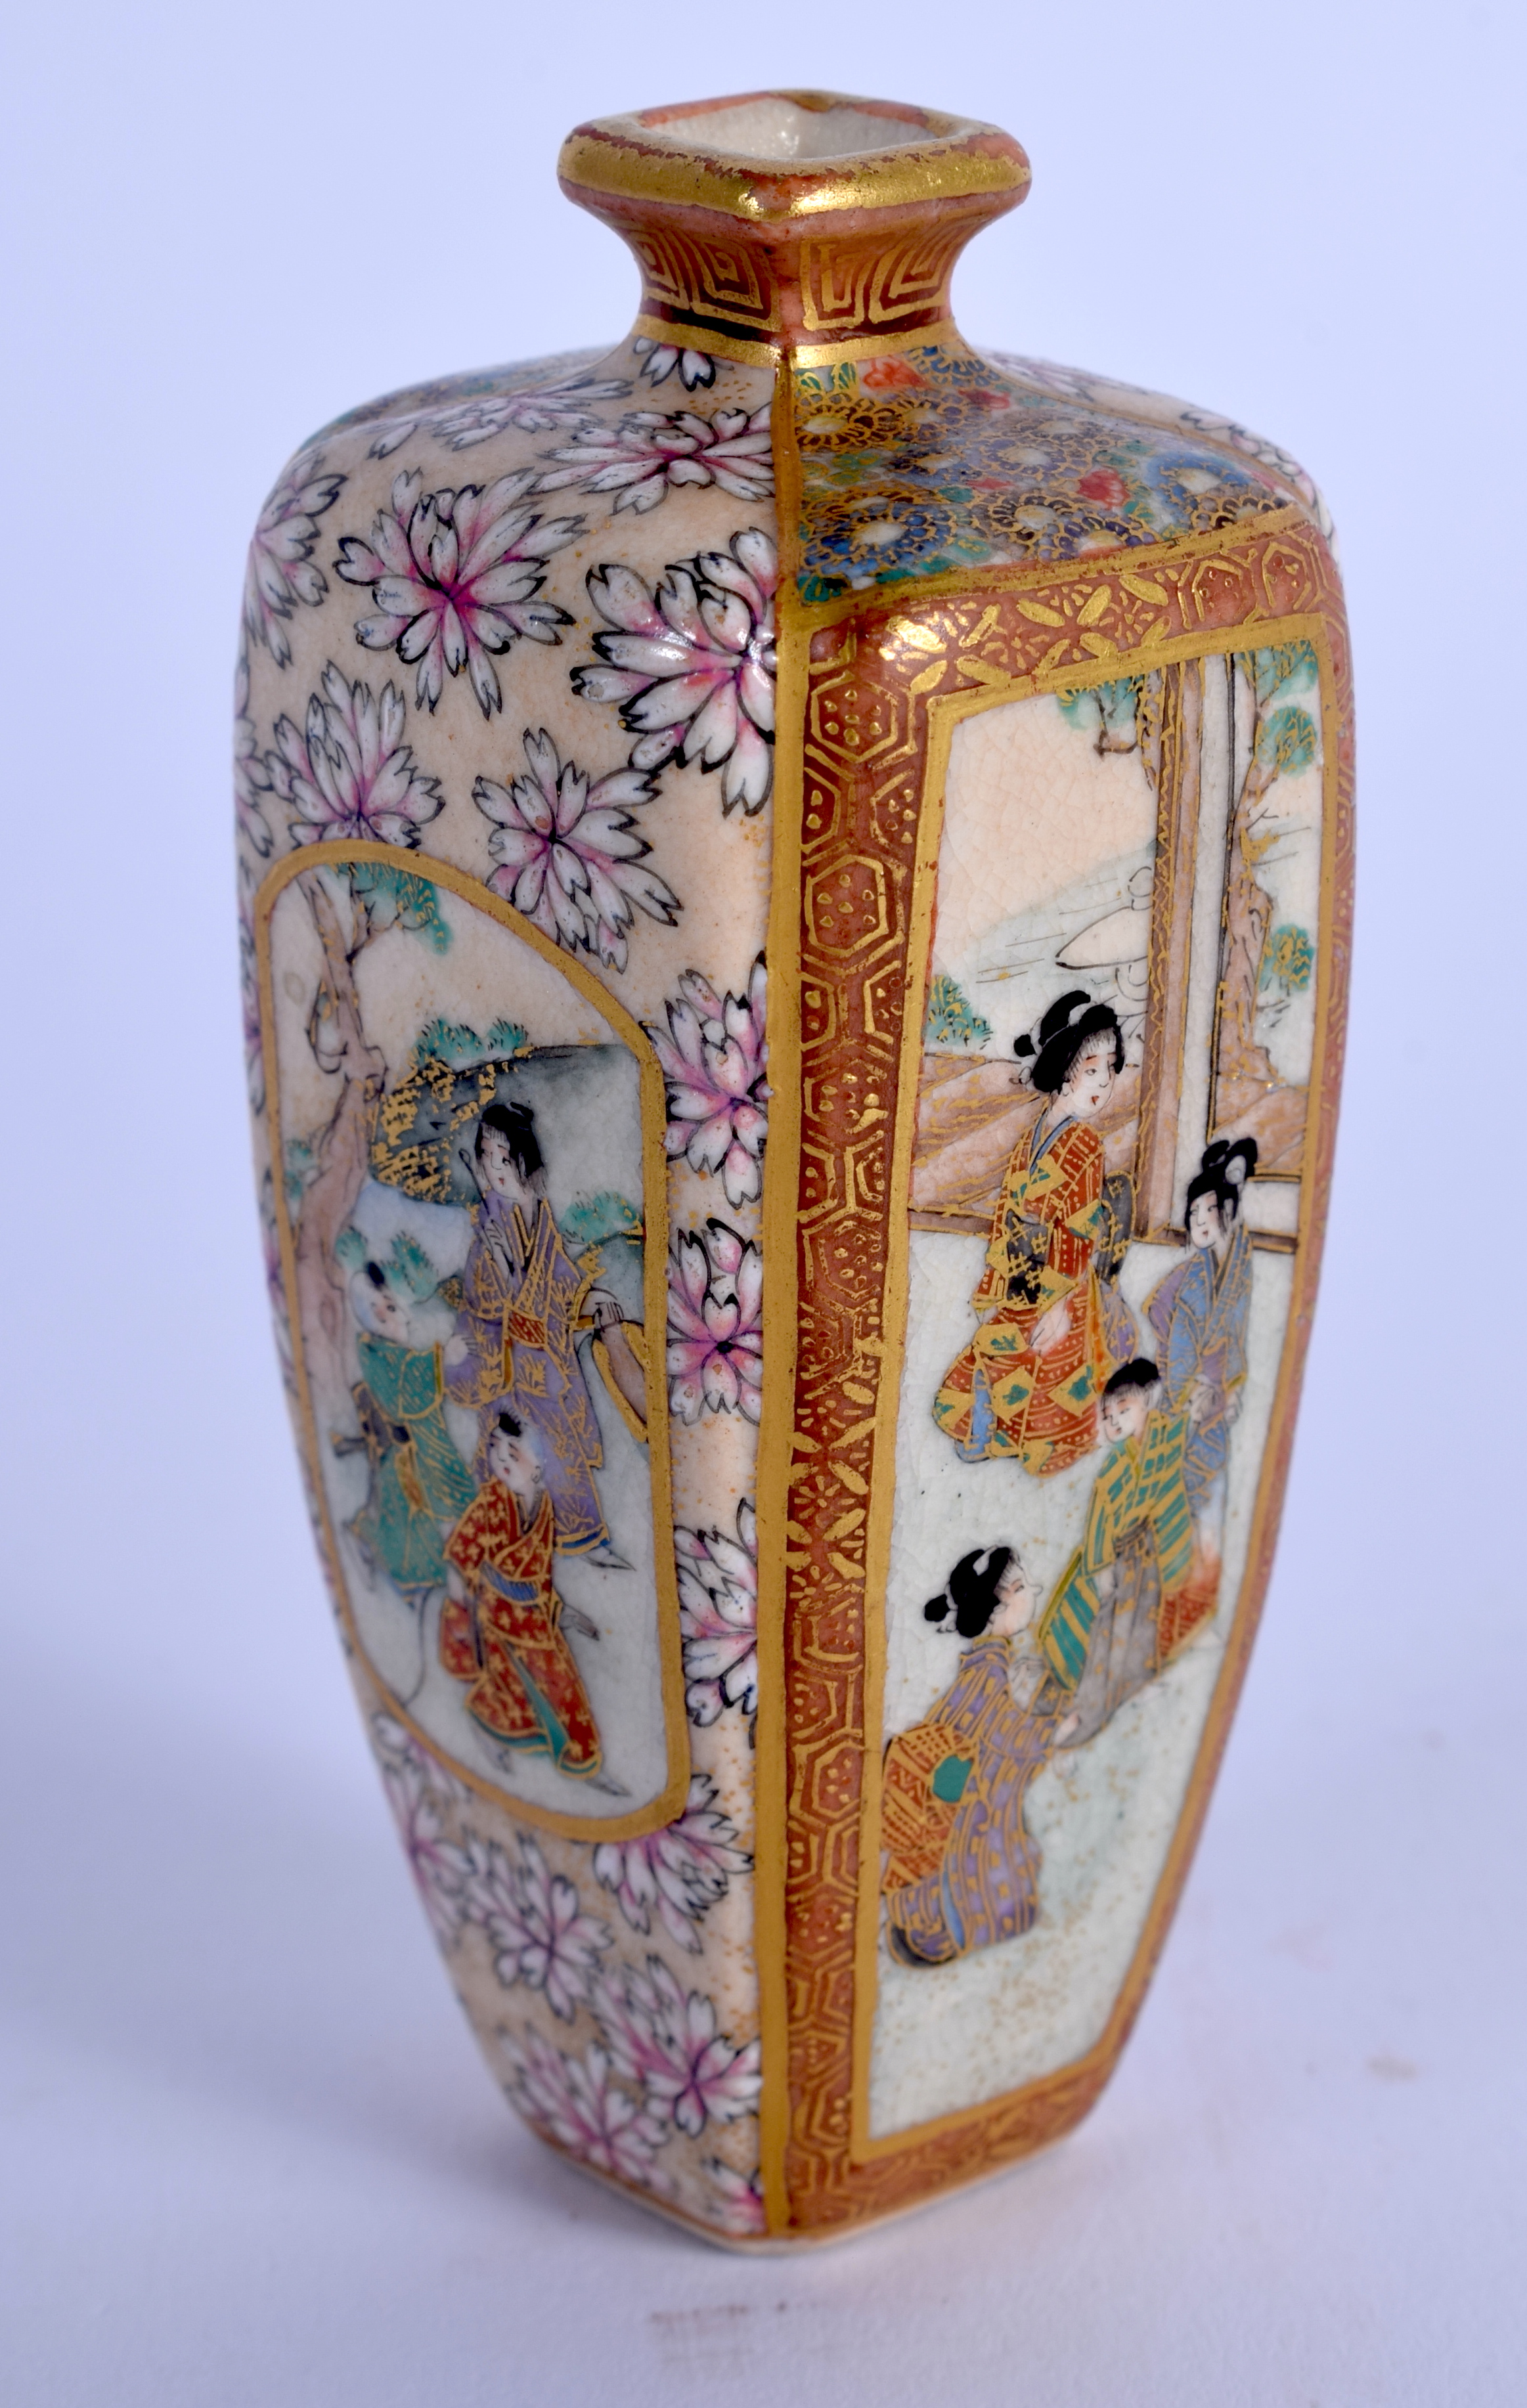 A MINIATURE LATE 19TH CENTURY JAPANESE MEIJI PERIOD SATSUMA VASE painted with figures and foliage. 7